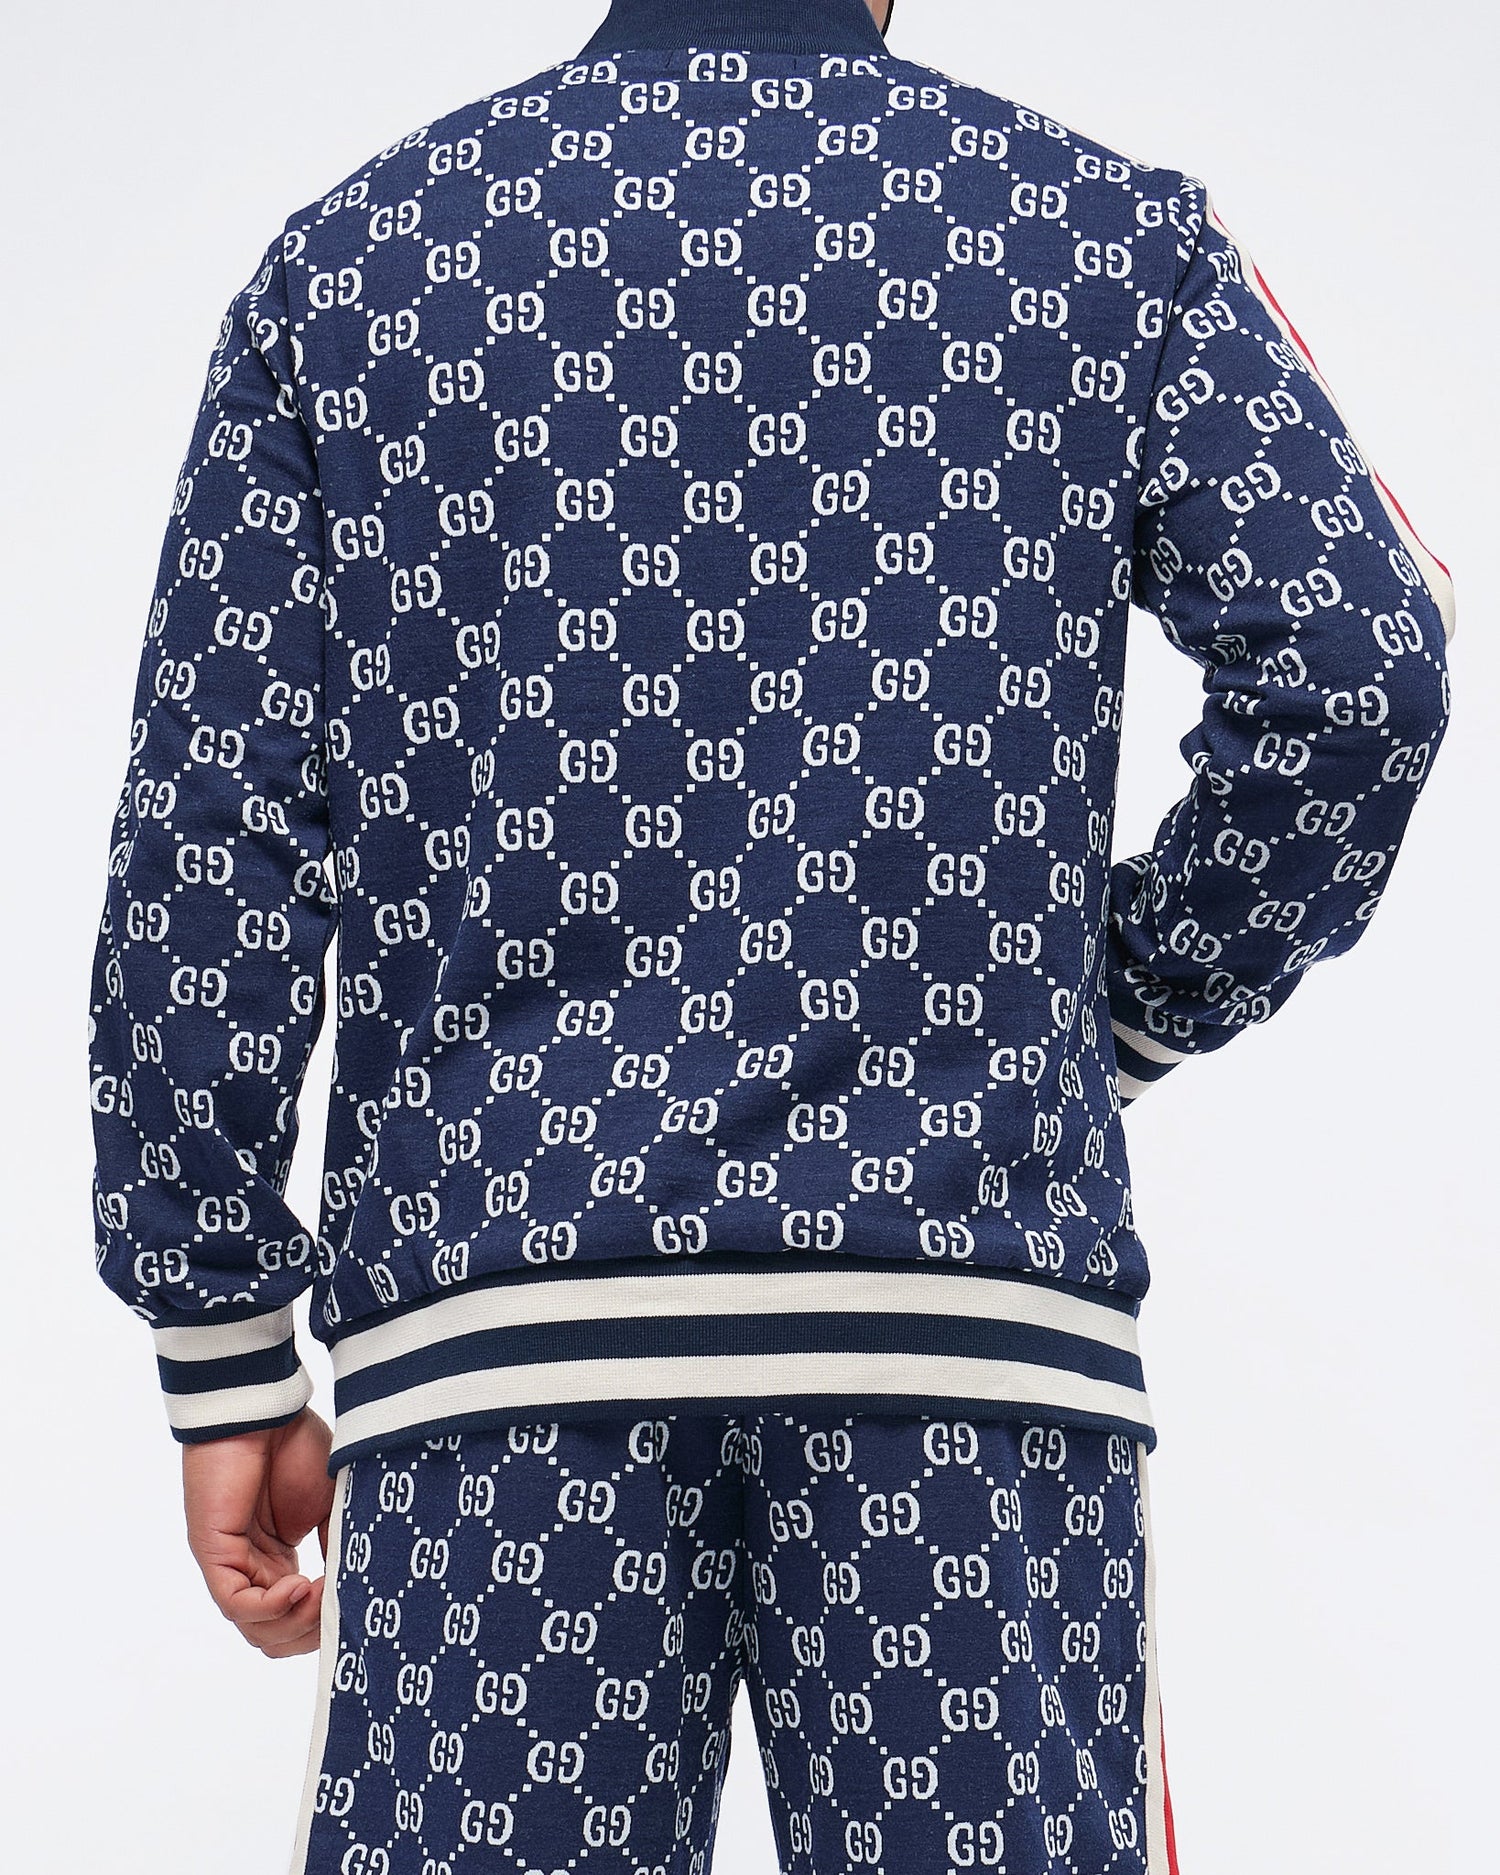 MOI OUTFIT-GG Monogram Over Printed Men Jacket 37.90